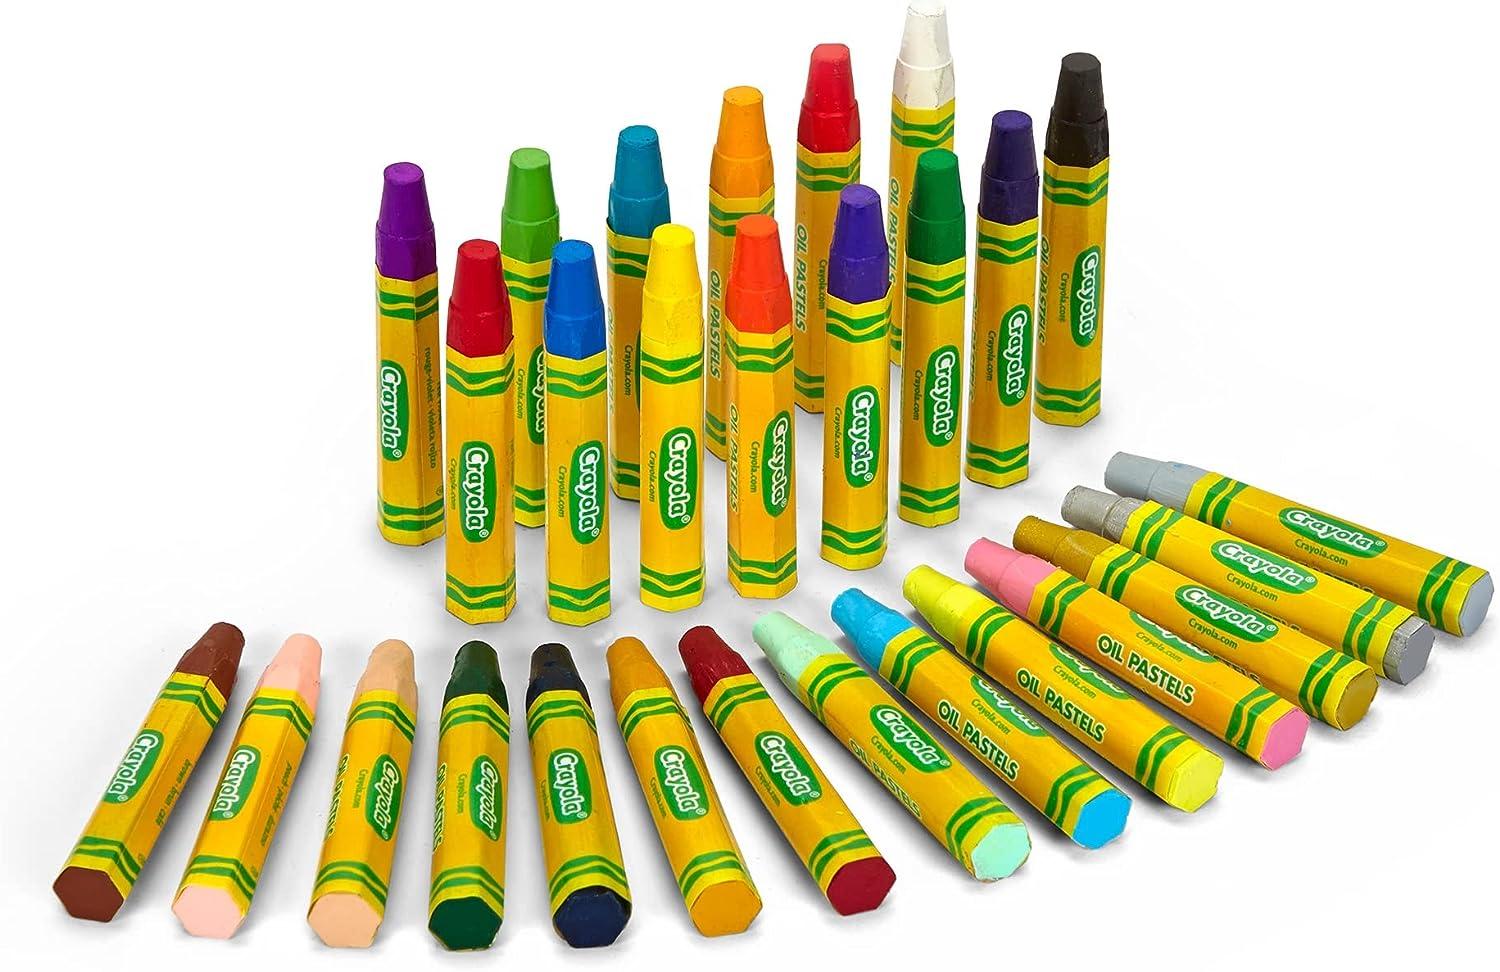 Crayola Washable Crayon Series Children Drawing Oil Pastels